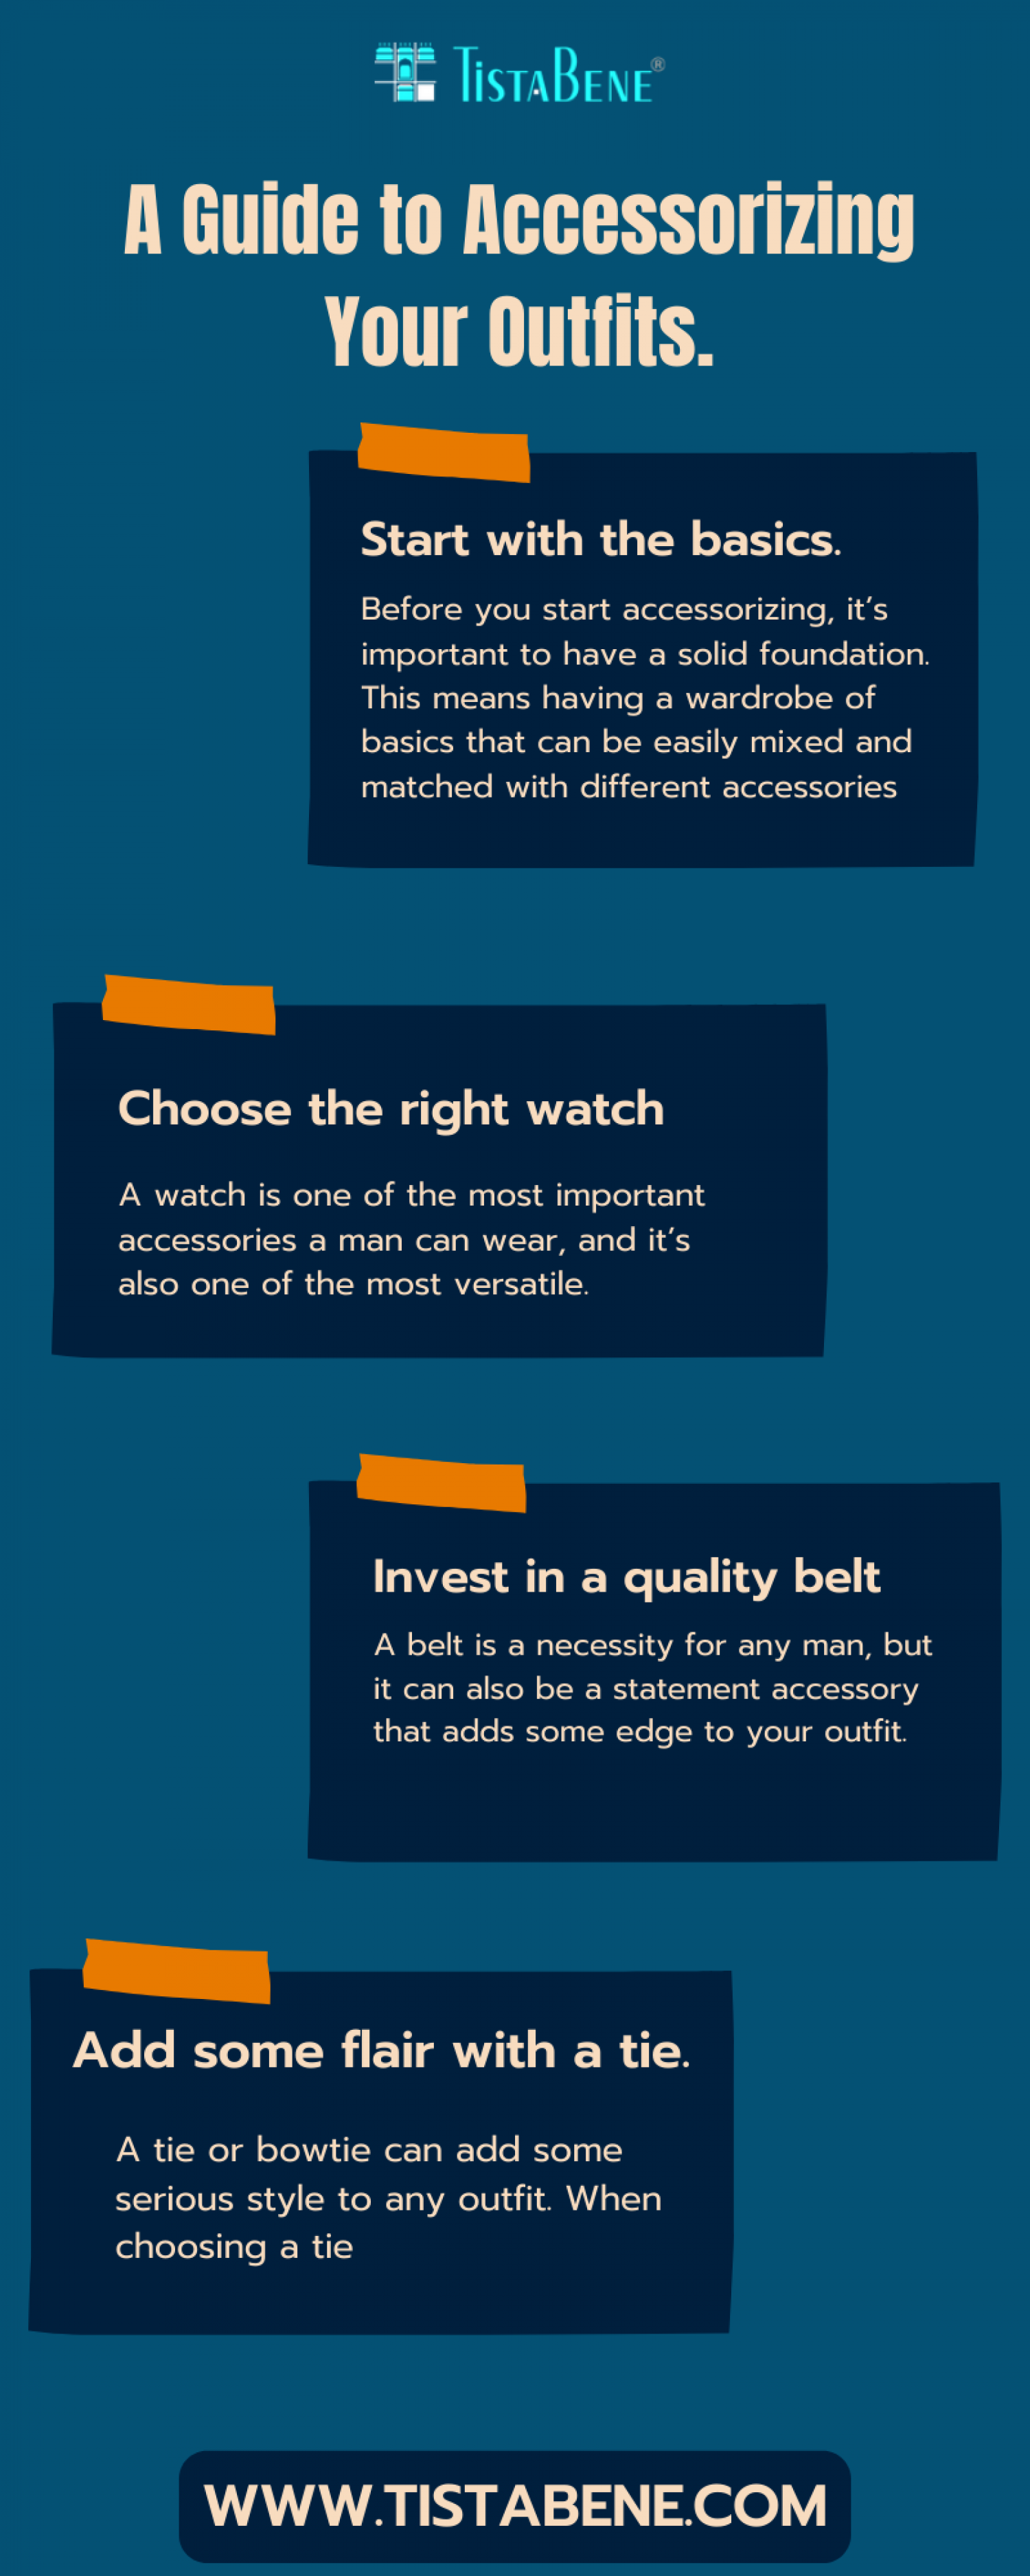 A Guide to Accessorizing Your Outfits. Infographic